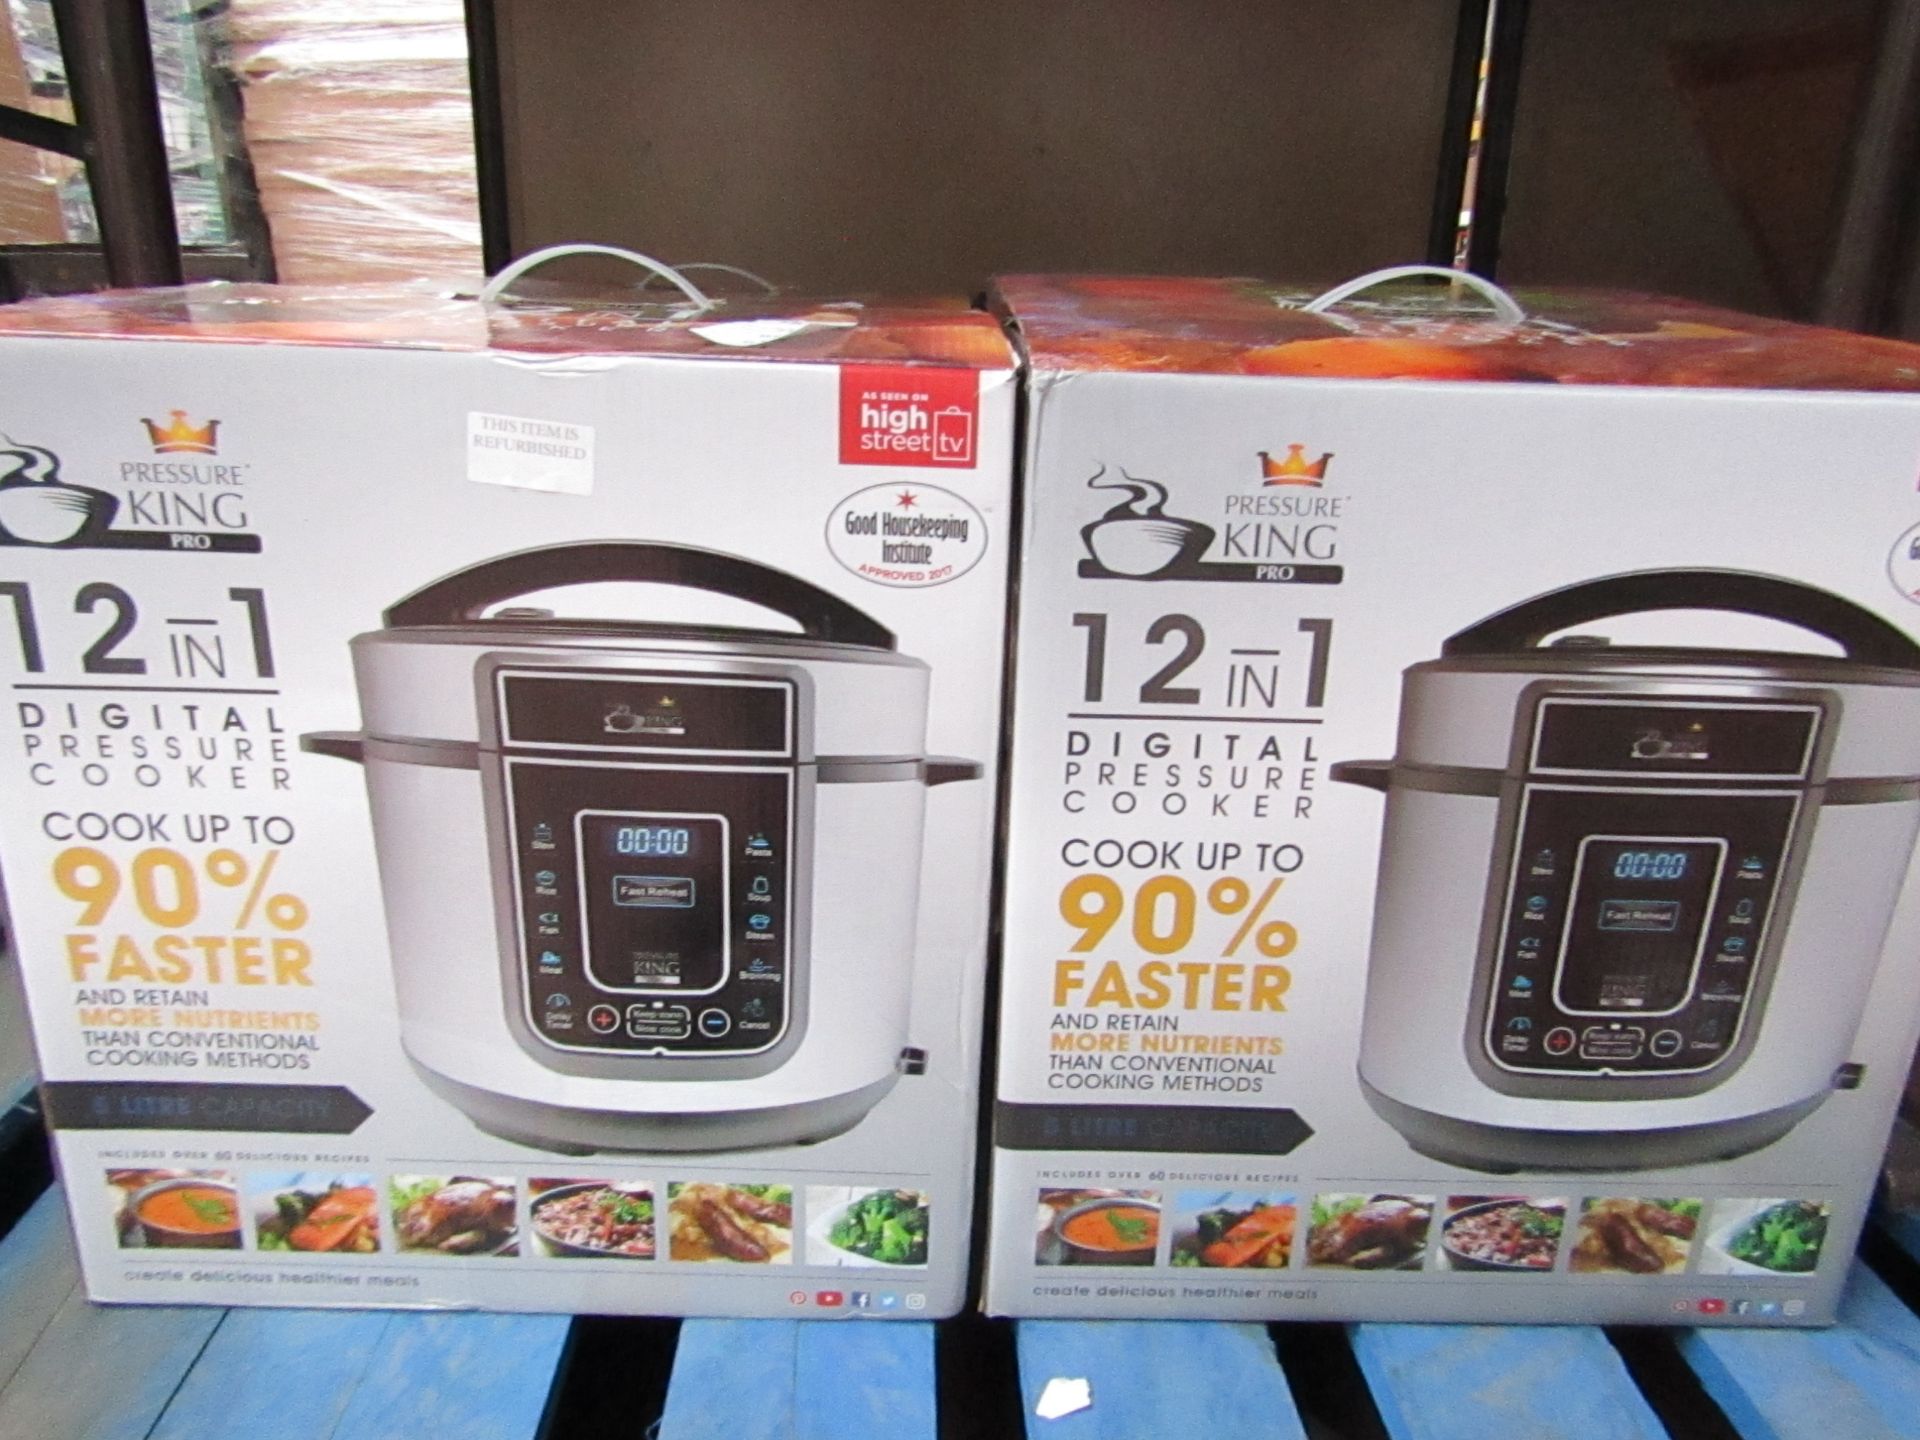 | 1X | PRESSURE KING PRO 12 IN 1 DIGITAL PRESSURE AND MULTI COOKER SILVER | REFURBISHED AND